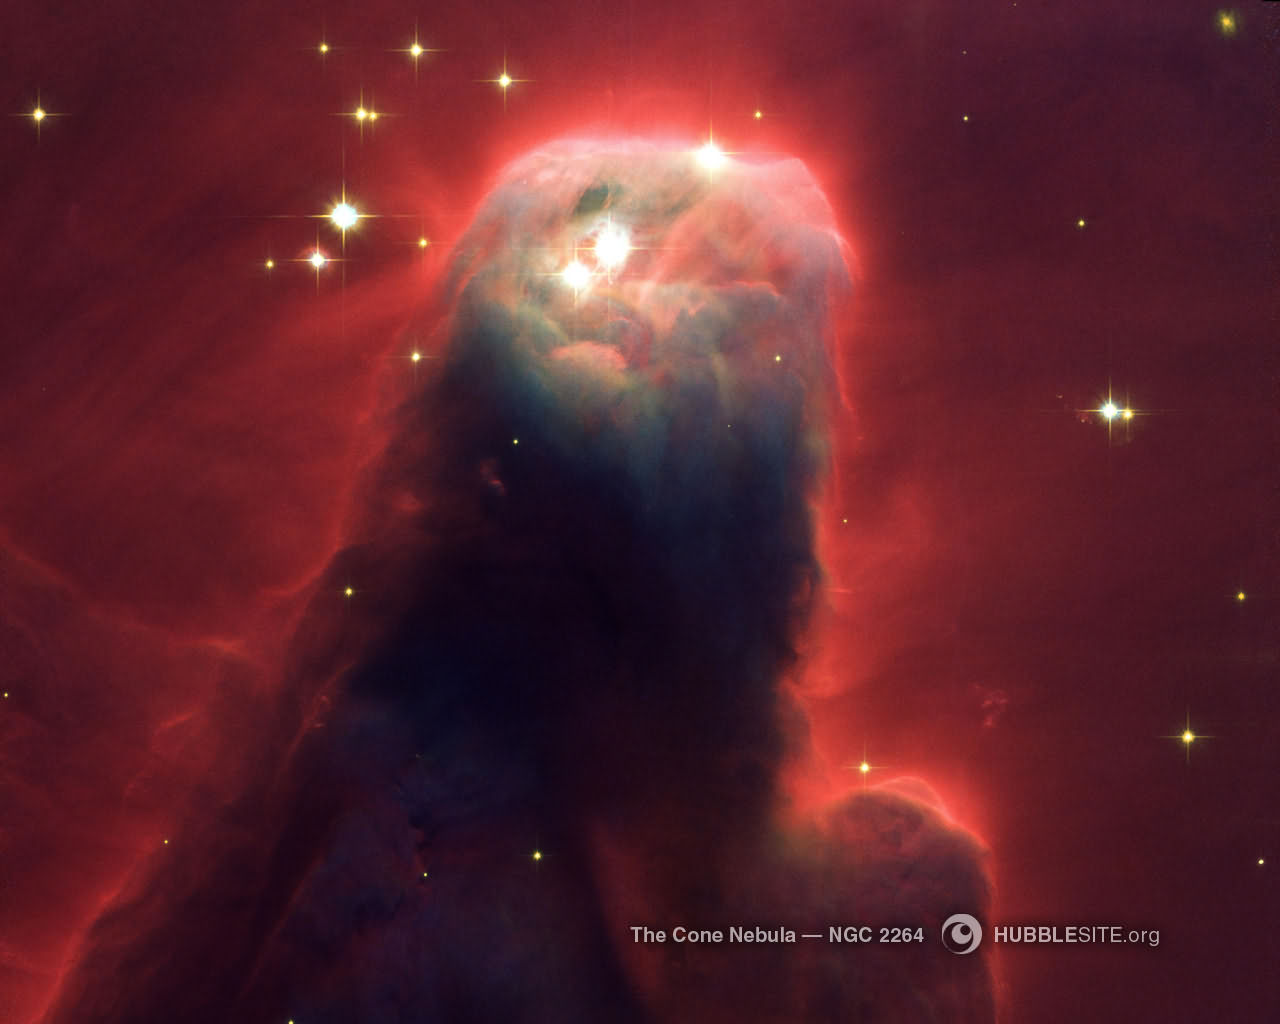 Cool pics from hubble